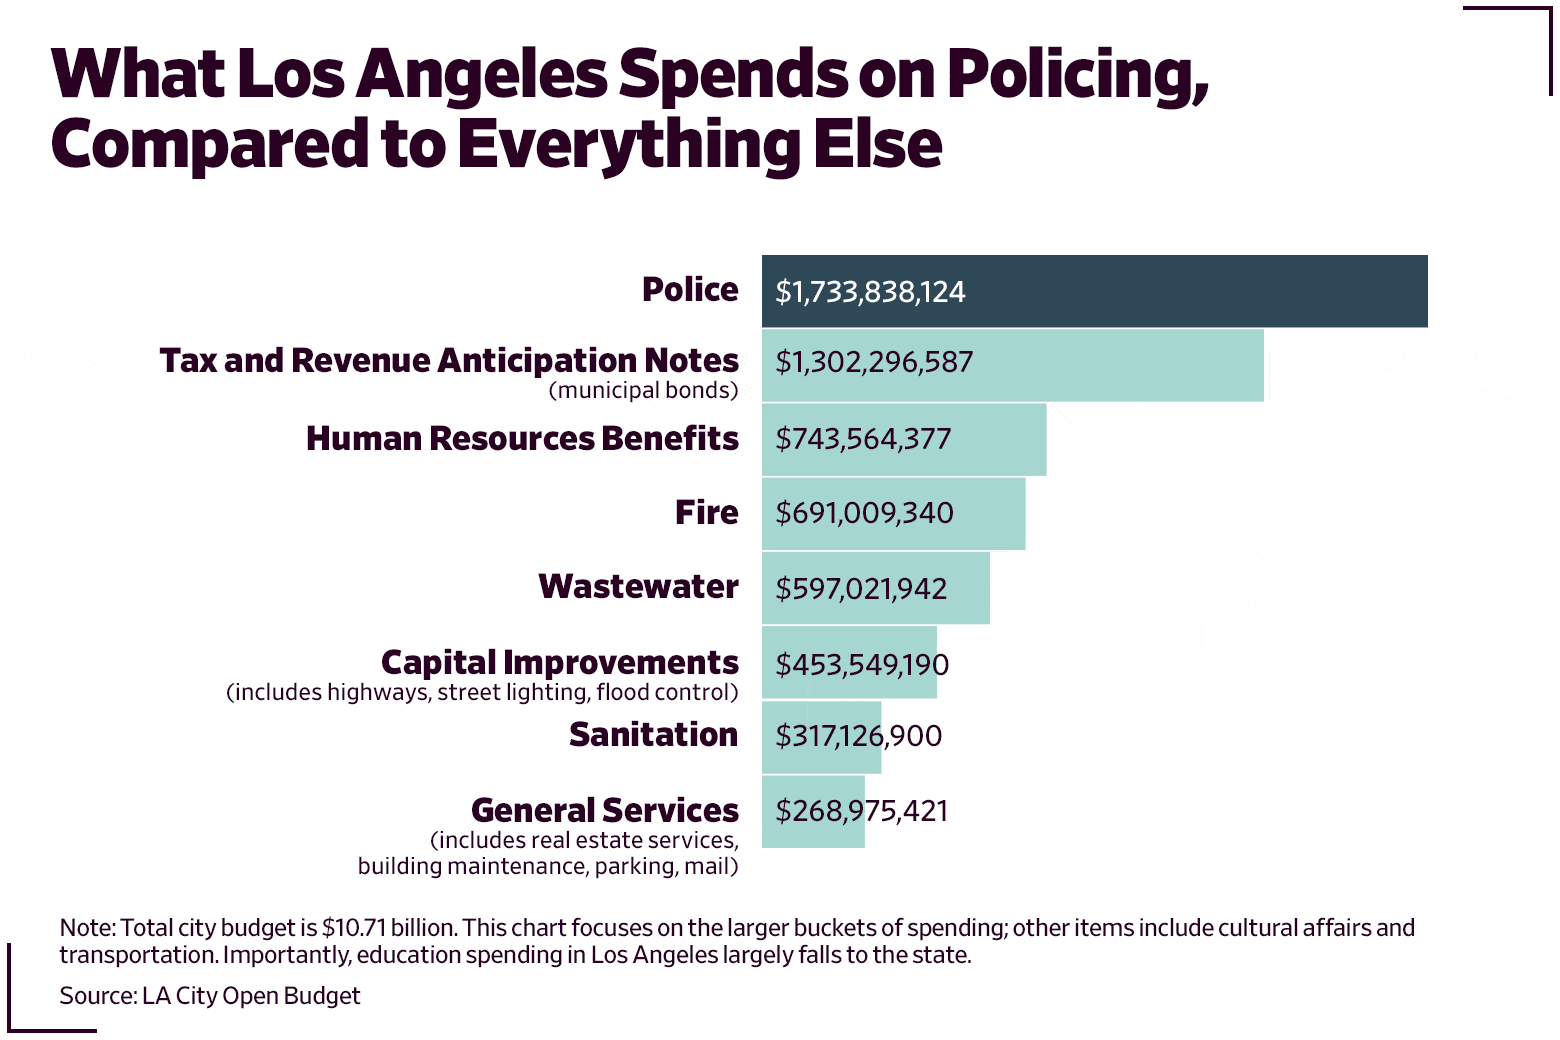 What Los Angeles spends on policing compared to everything else. 